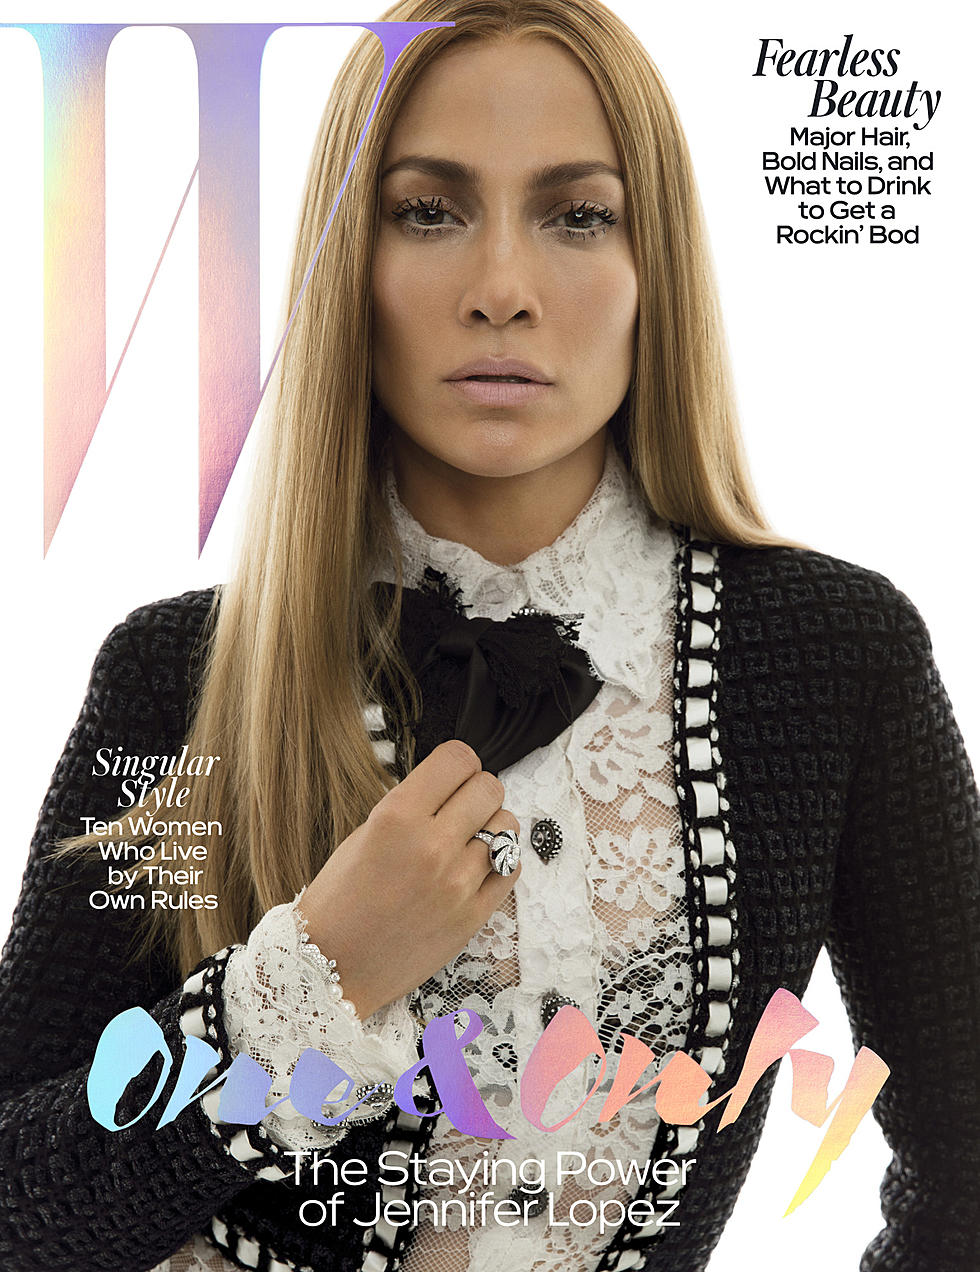 Jennifer Lopez Says She&#8217;s Misunderstood, and Musicians Are Bad in Bed